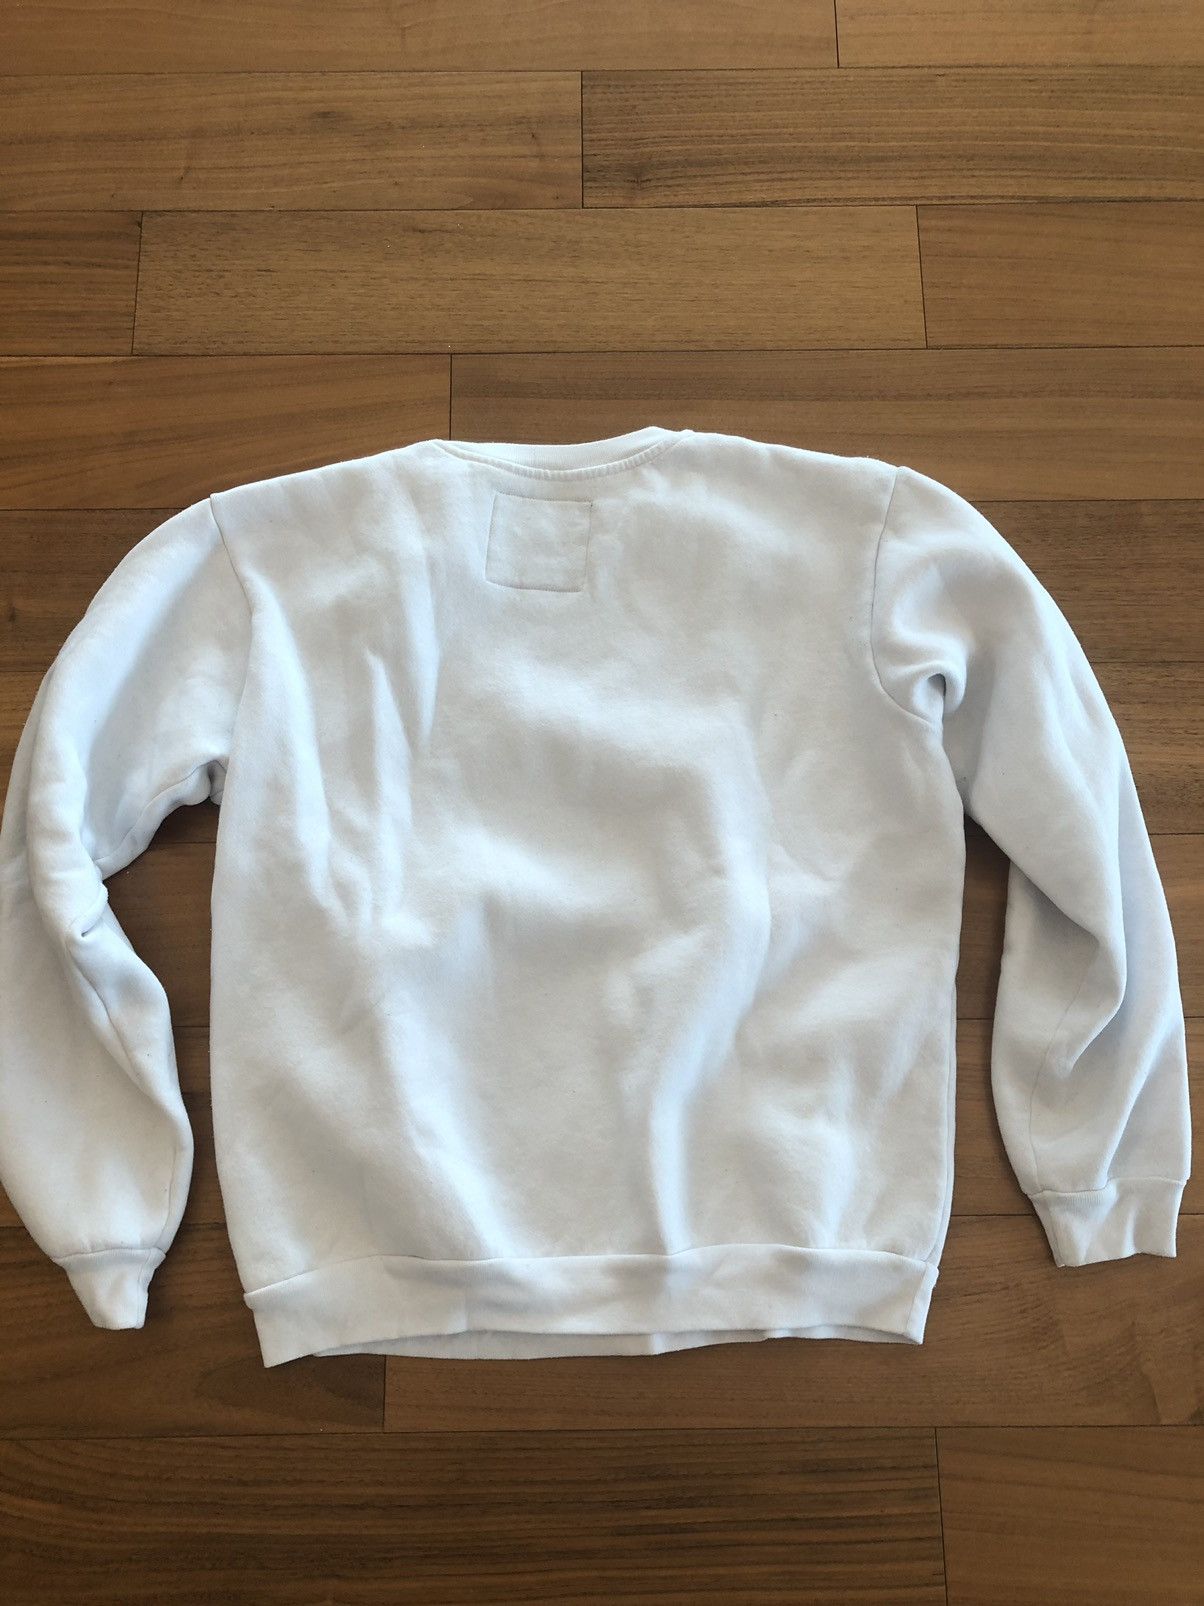 Local Authority Local Authority Sweatshirt Size US S / EU 44-46 / 1 - 2 Preview